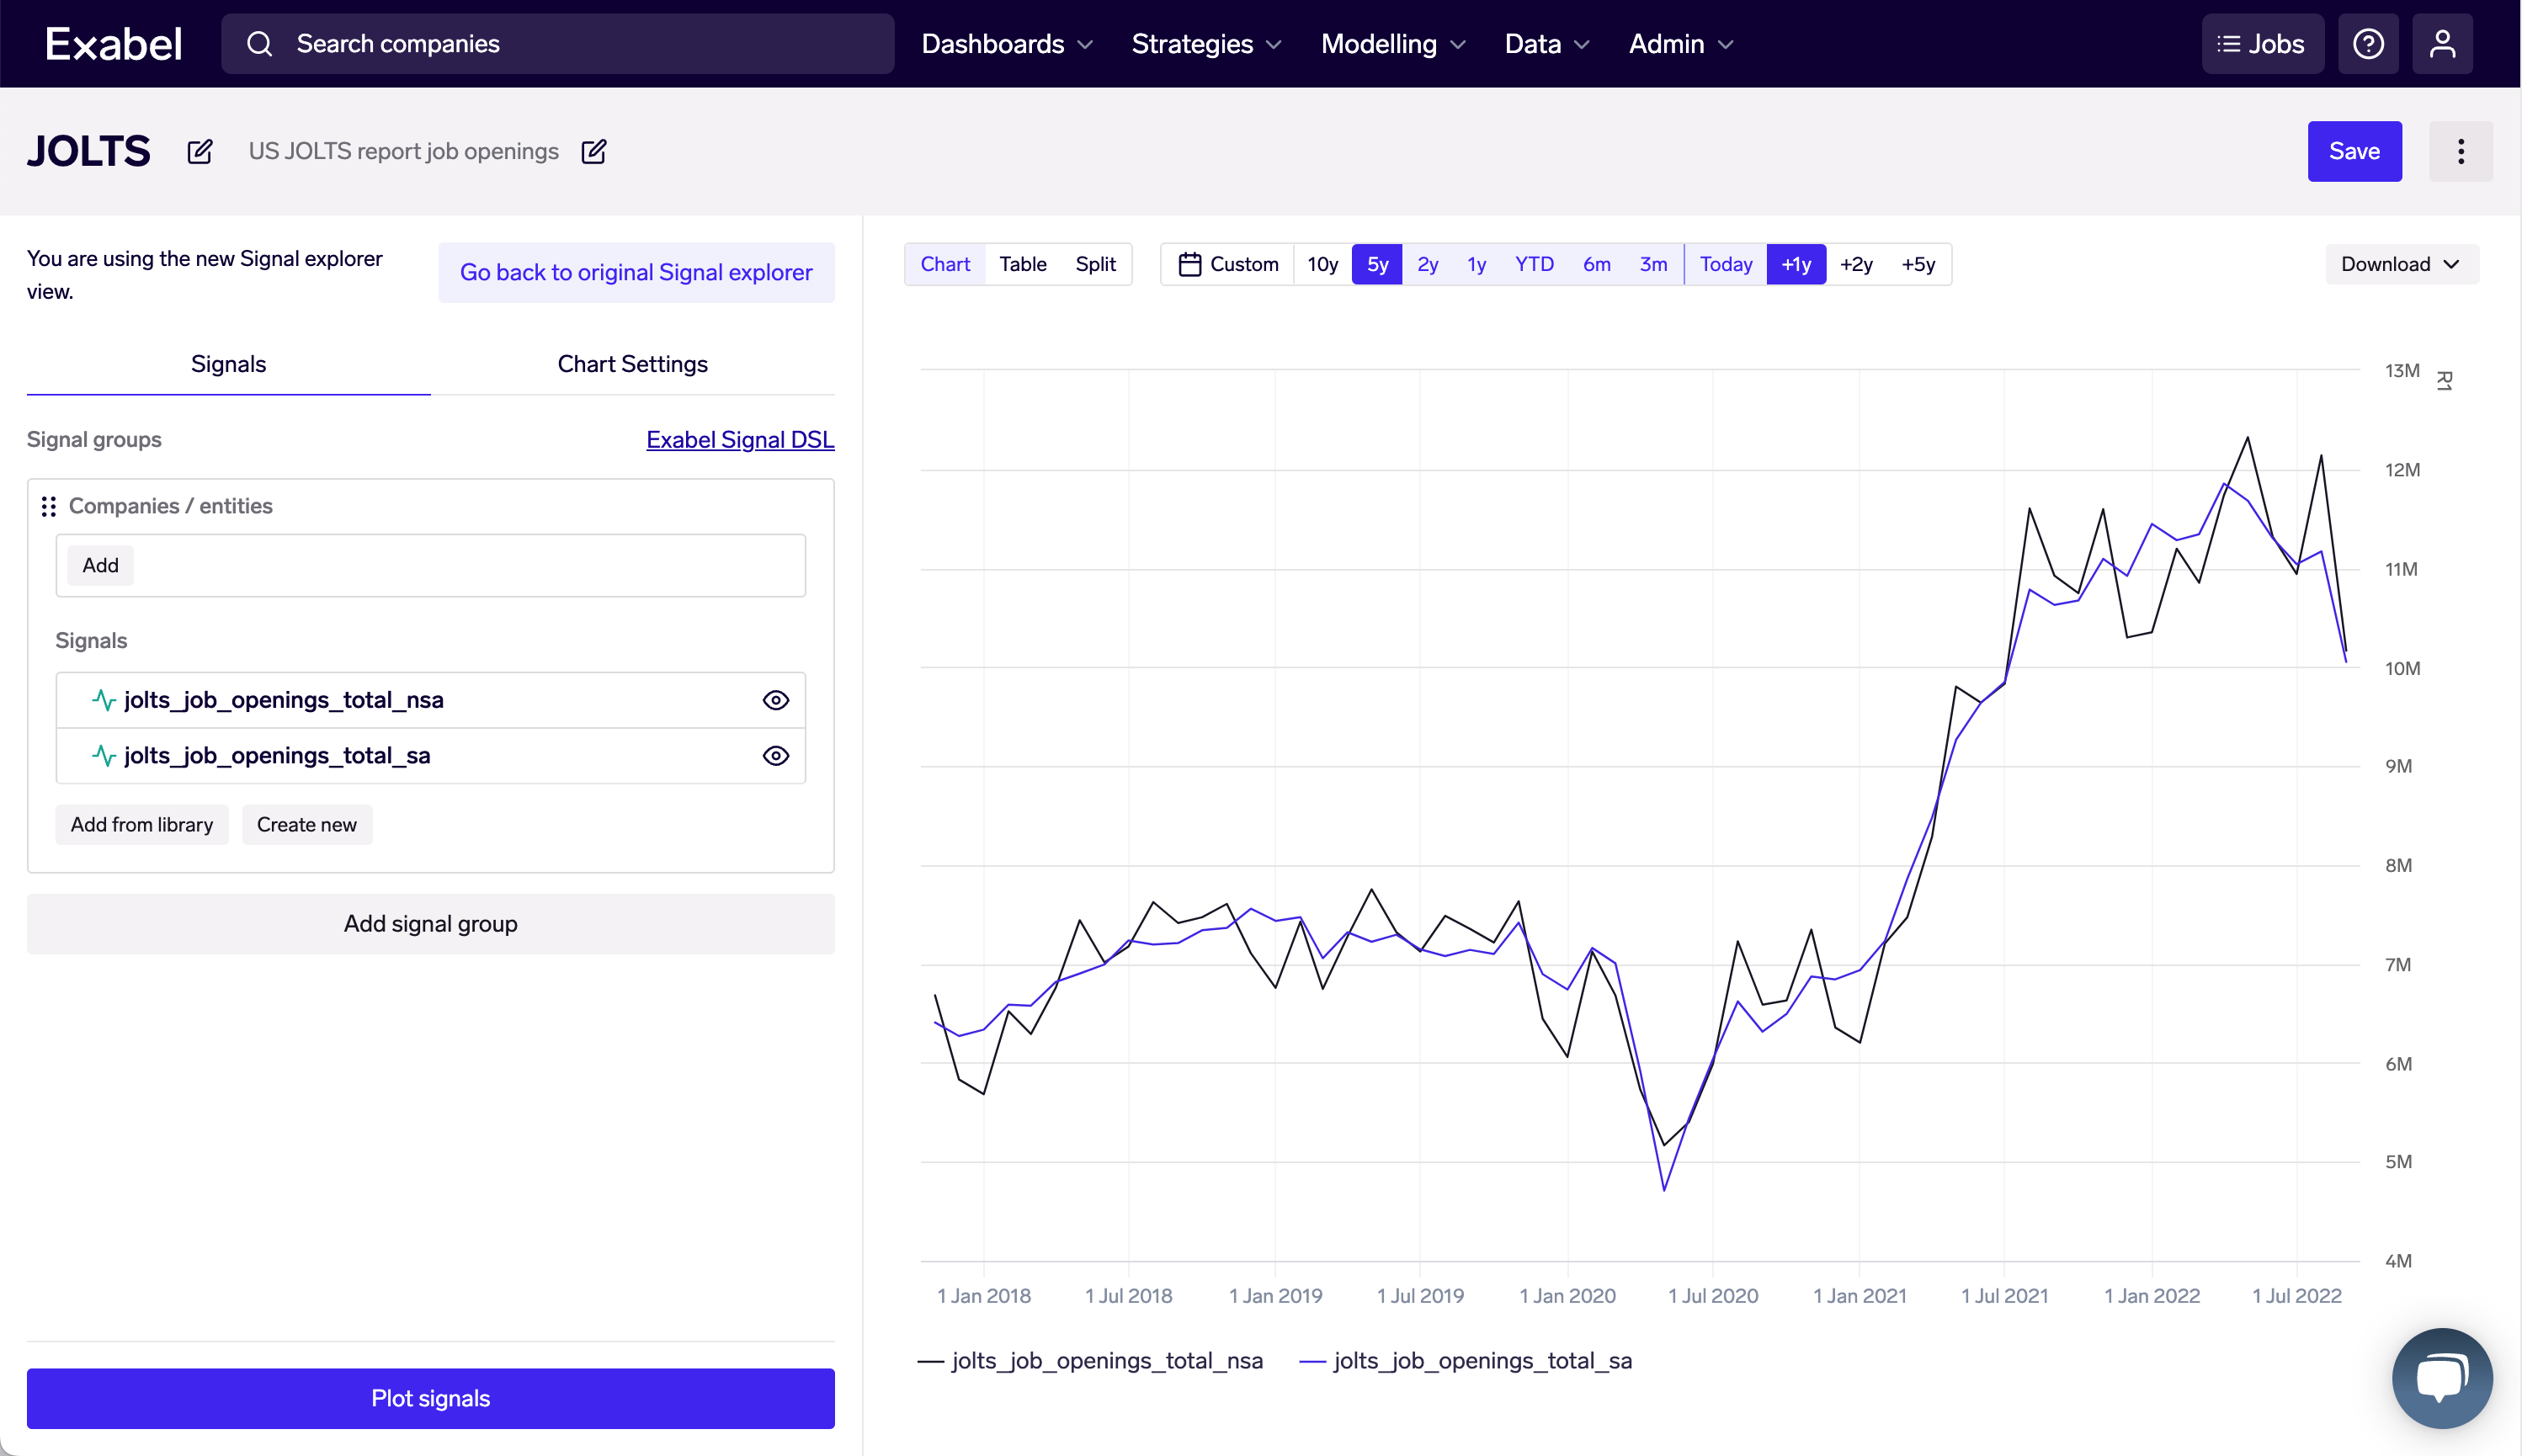 Revamped charting experience in Signal Explorer